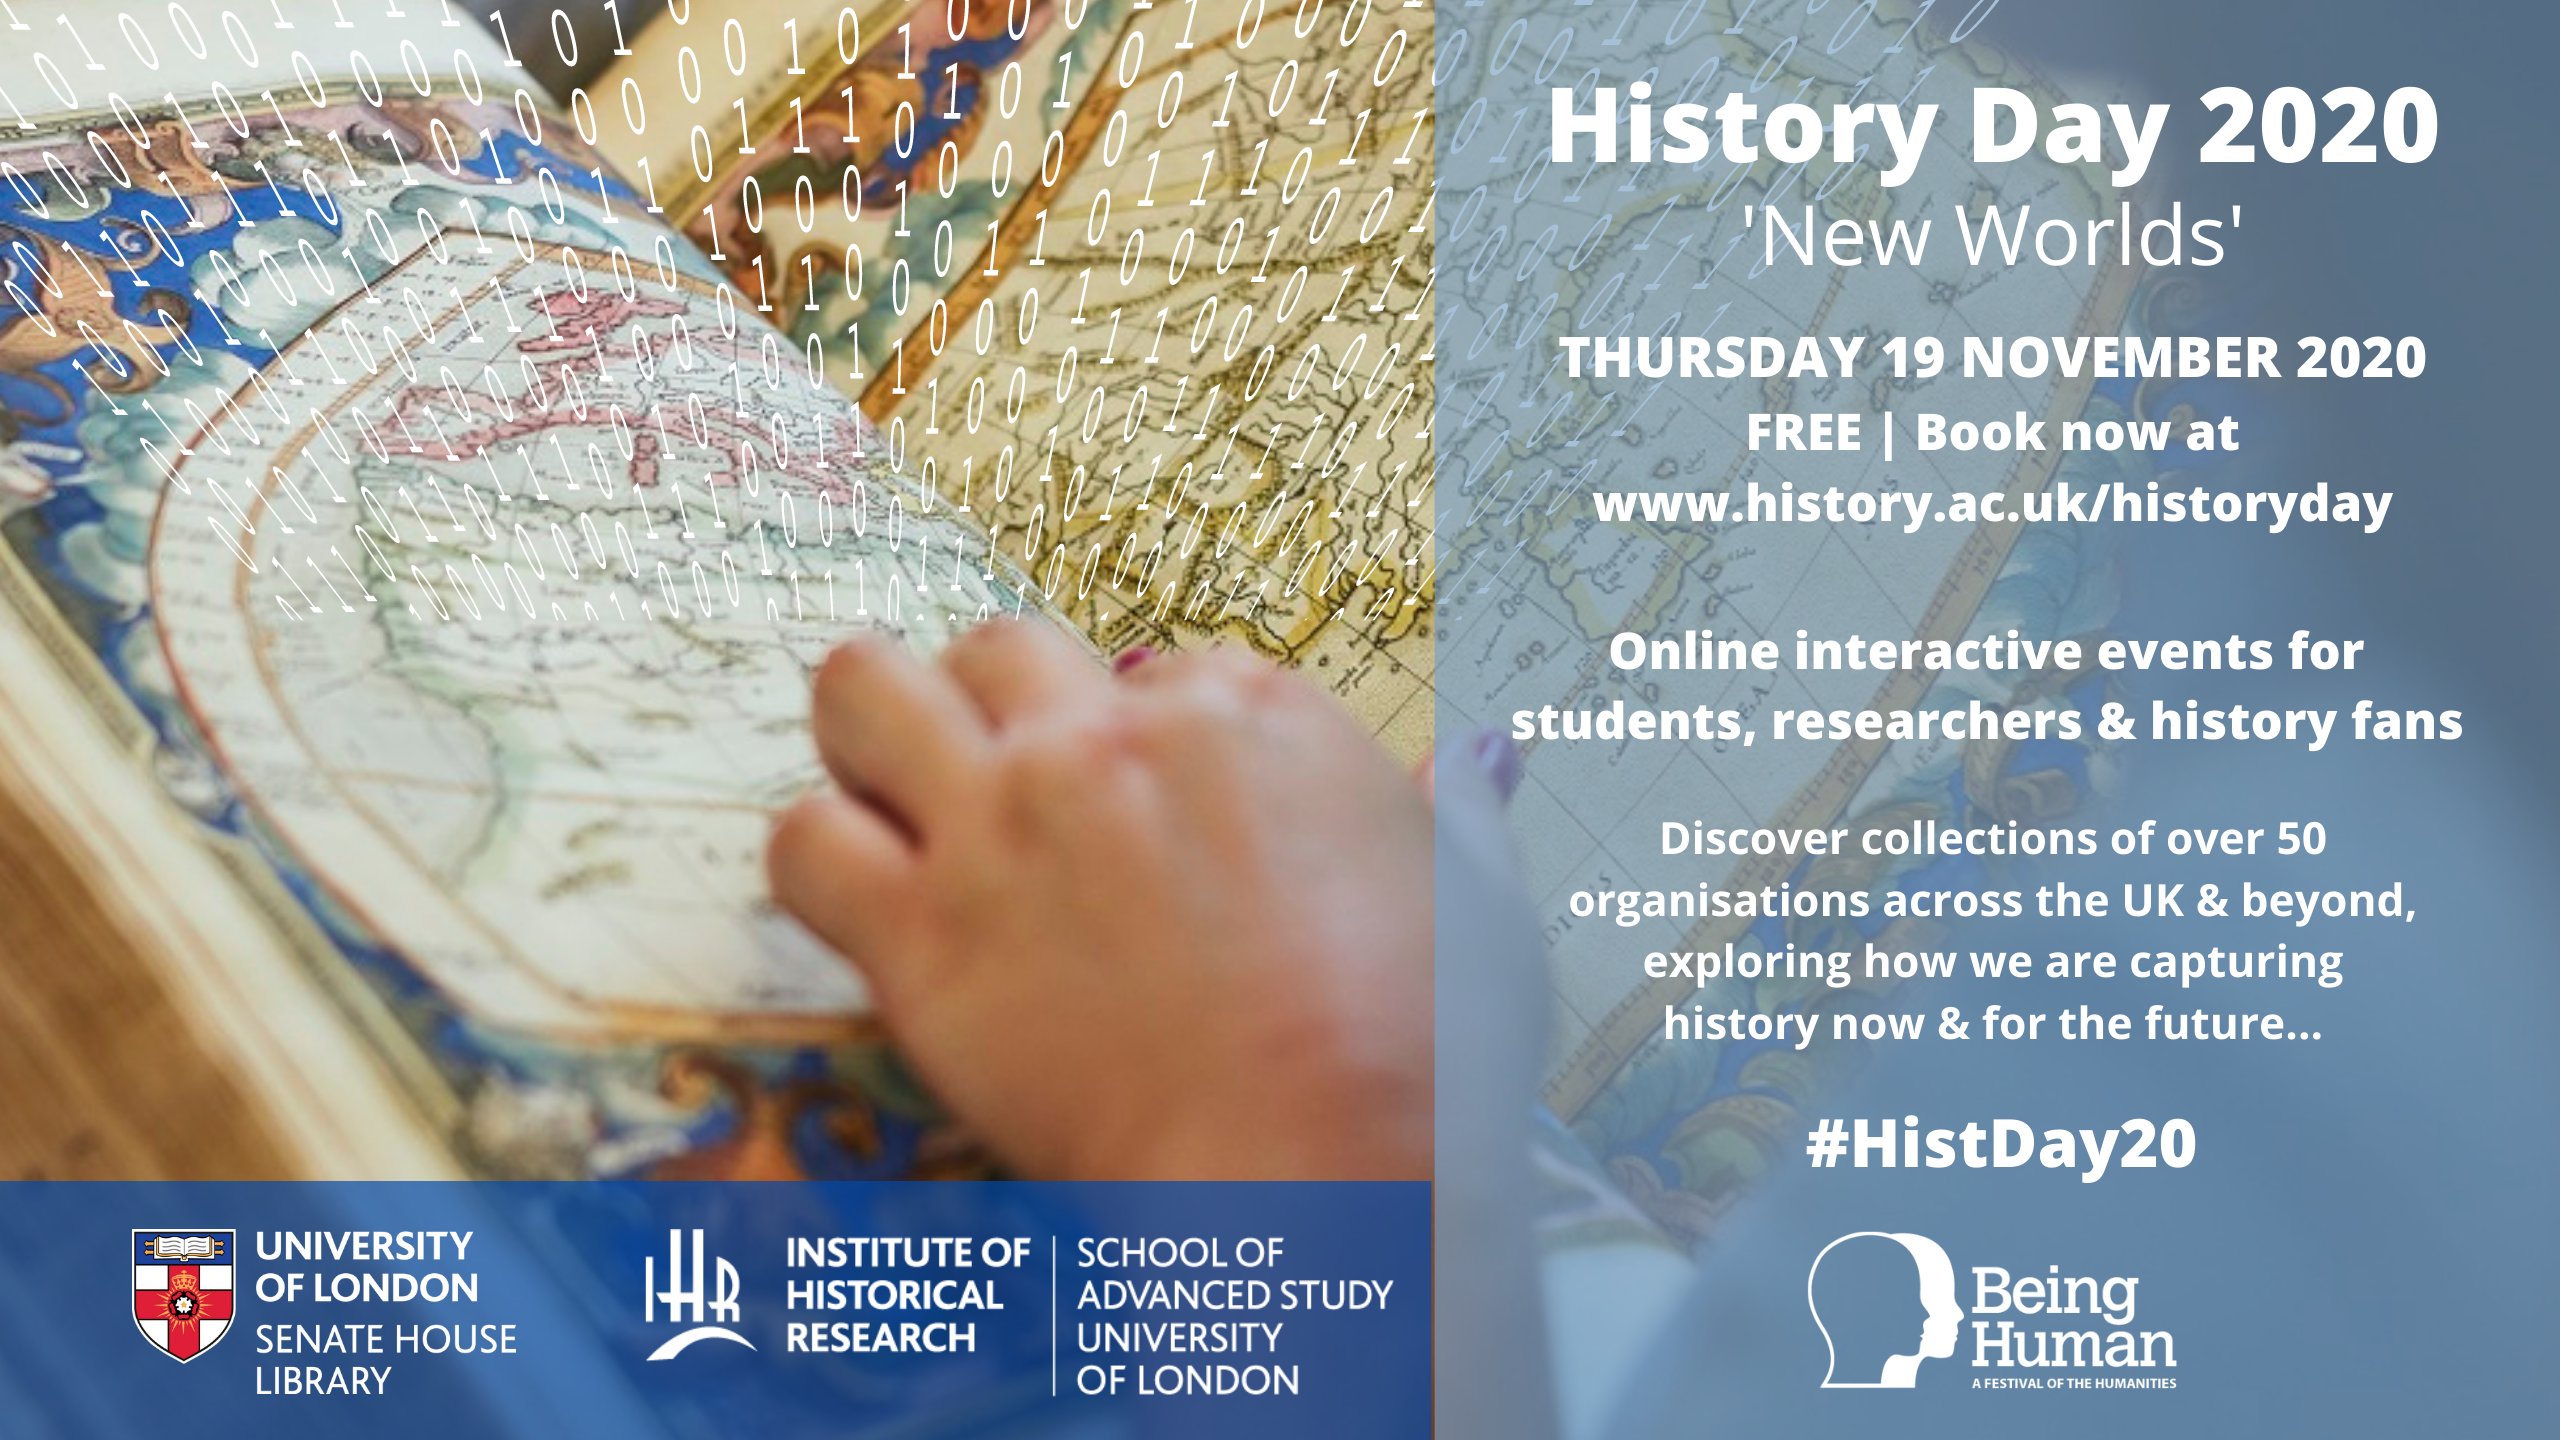 History Online  Institute of Historical Research